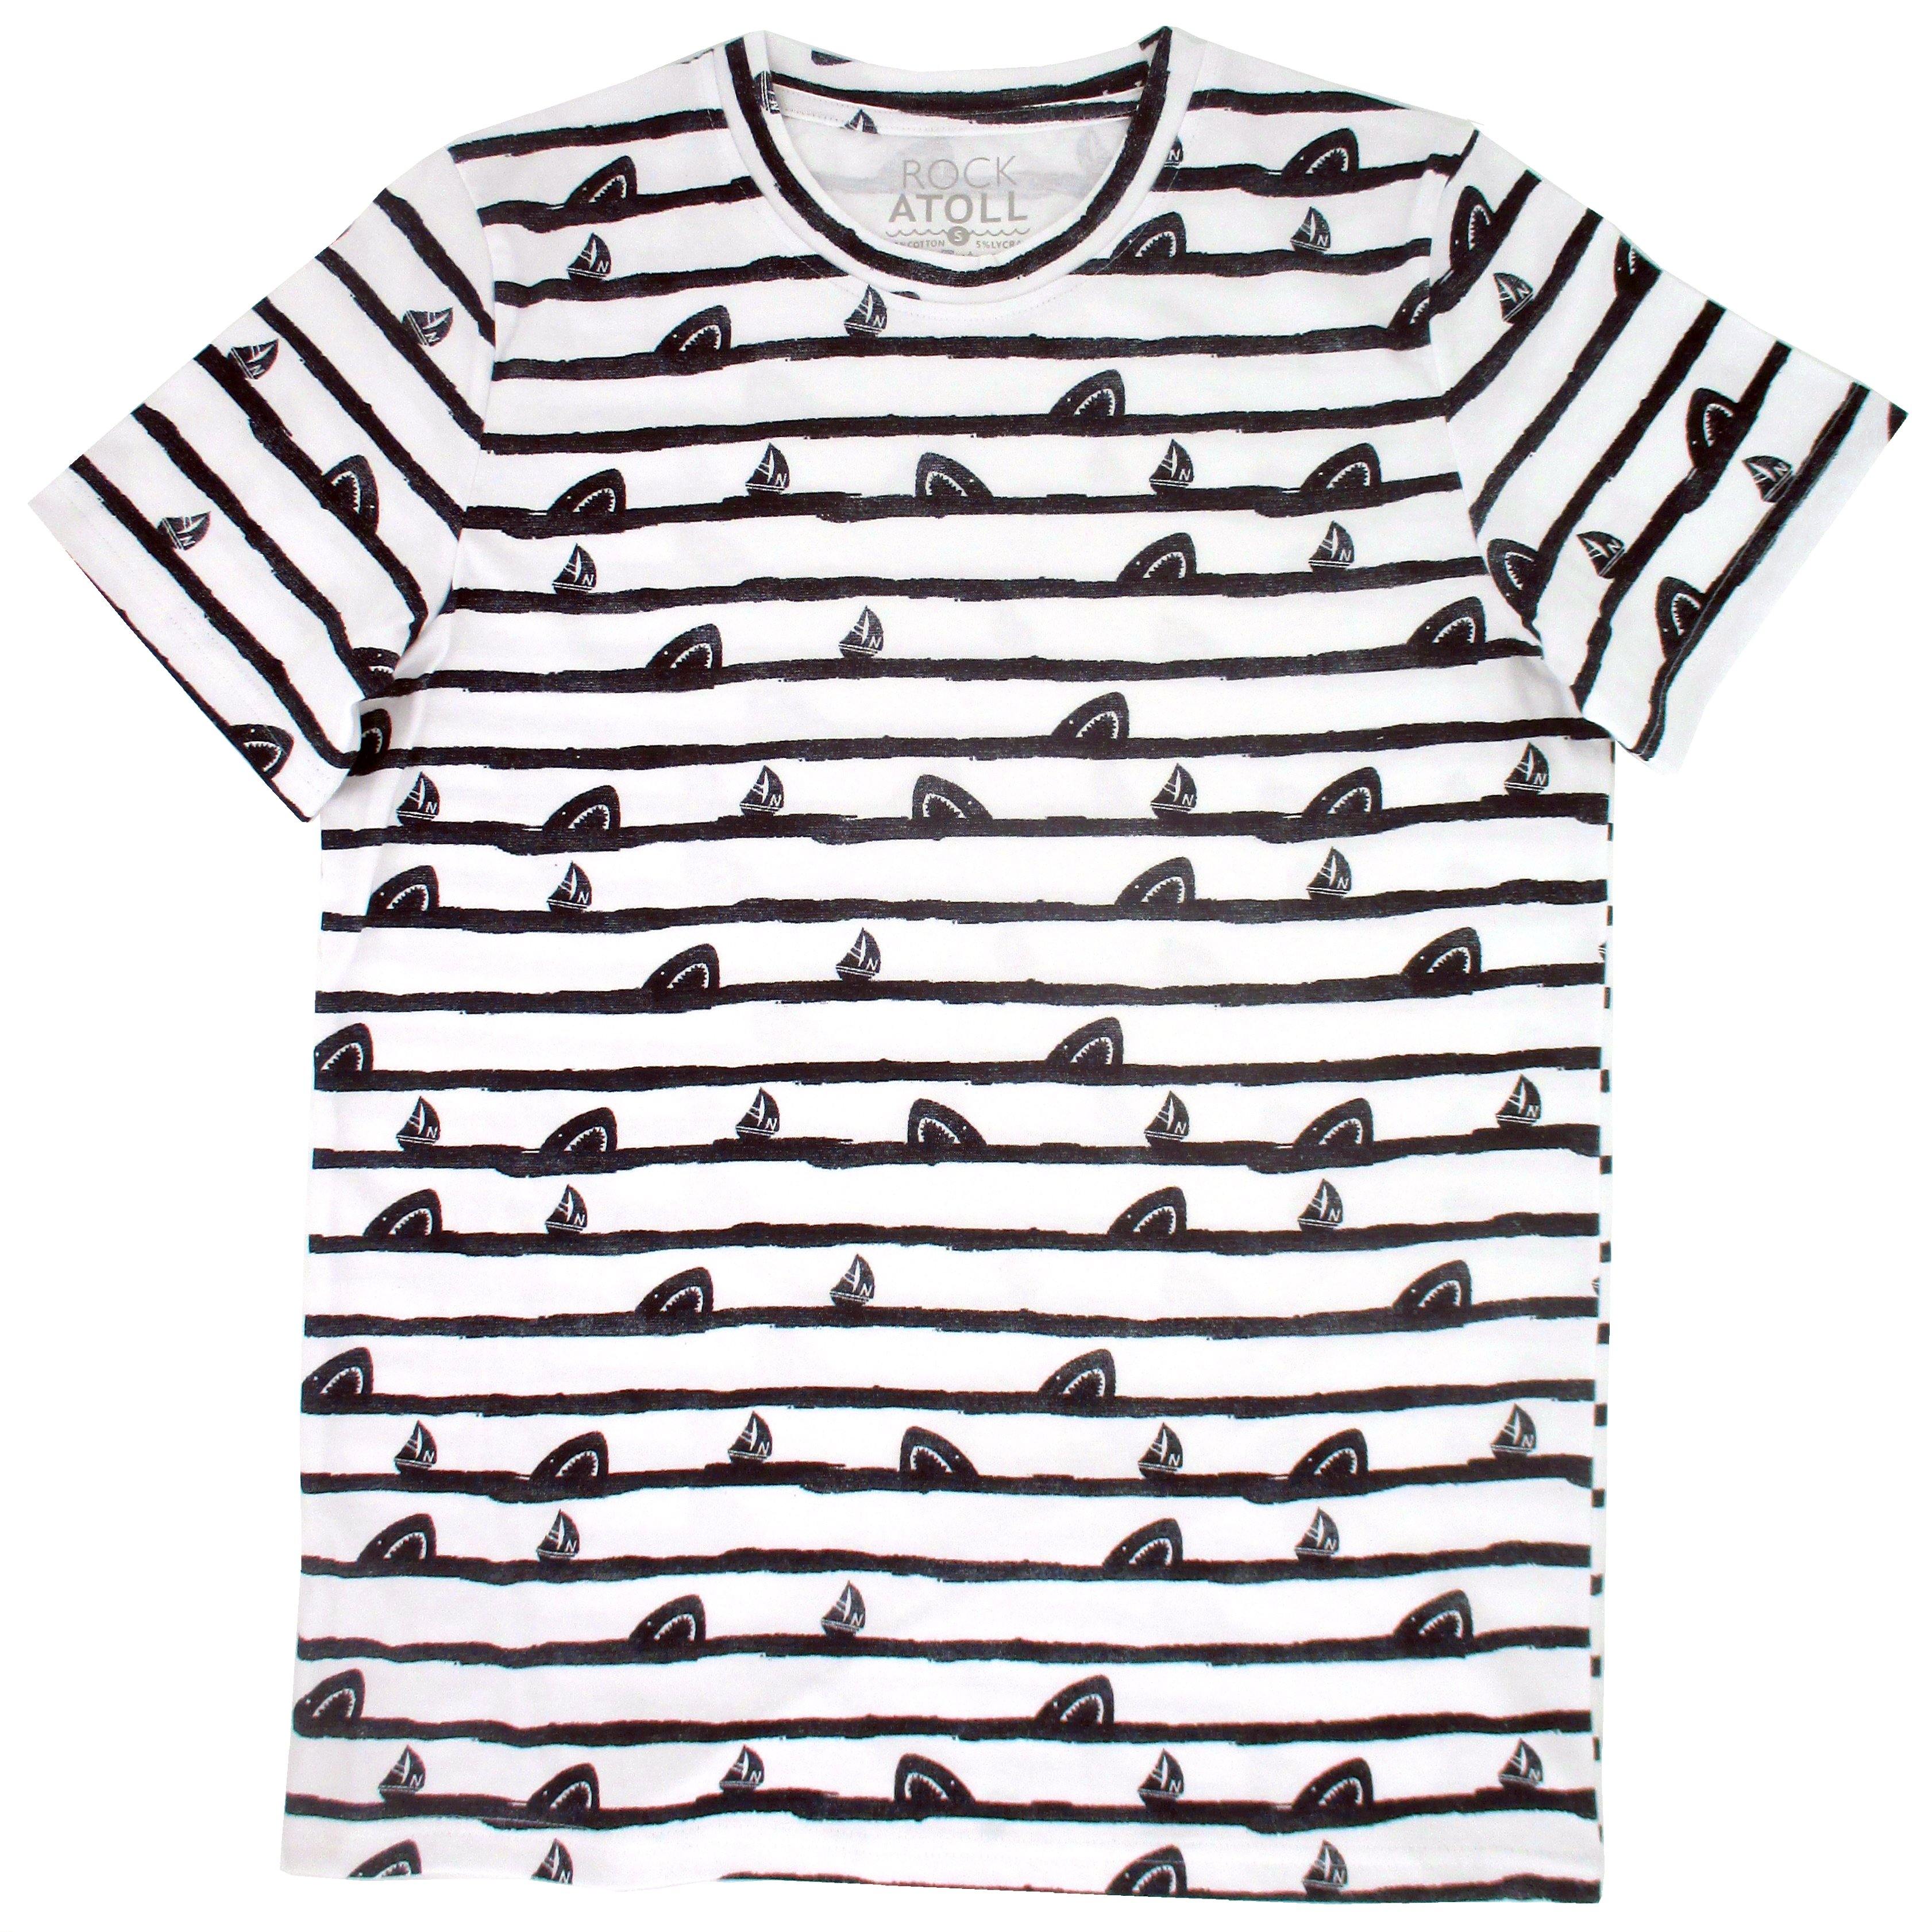 Rock Atoll Shark and Sailboat Waves Striped Tee in White